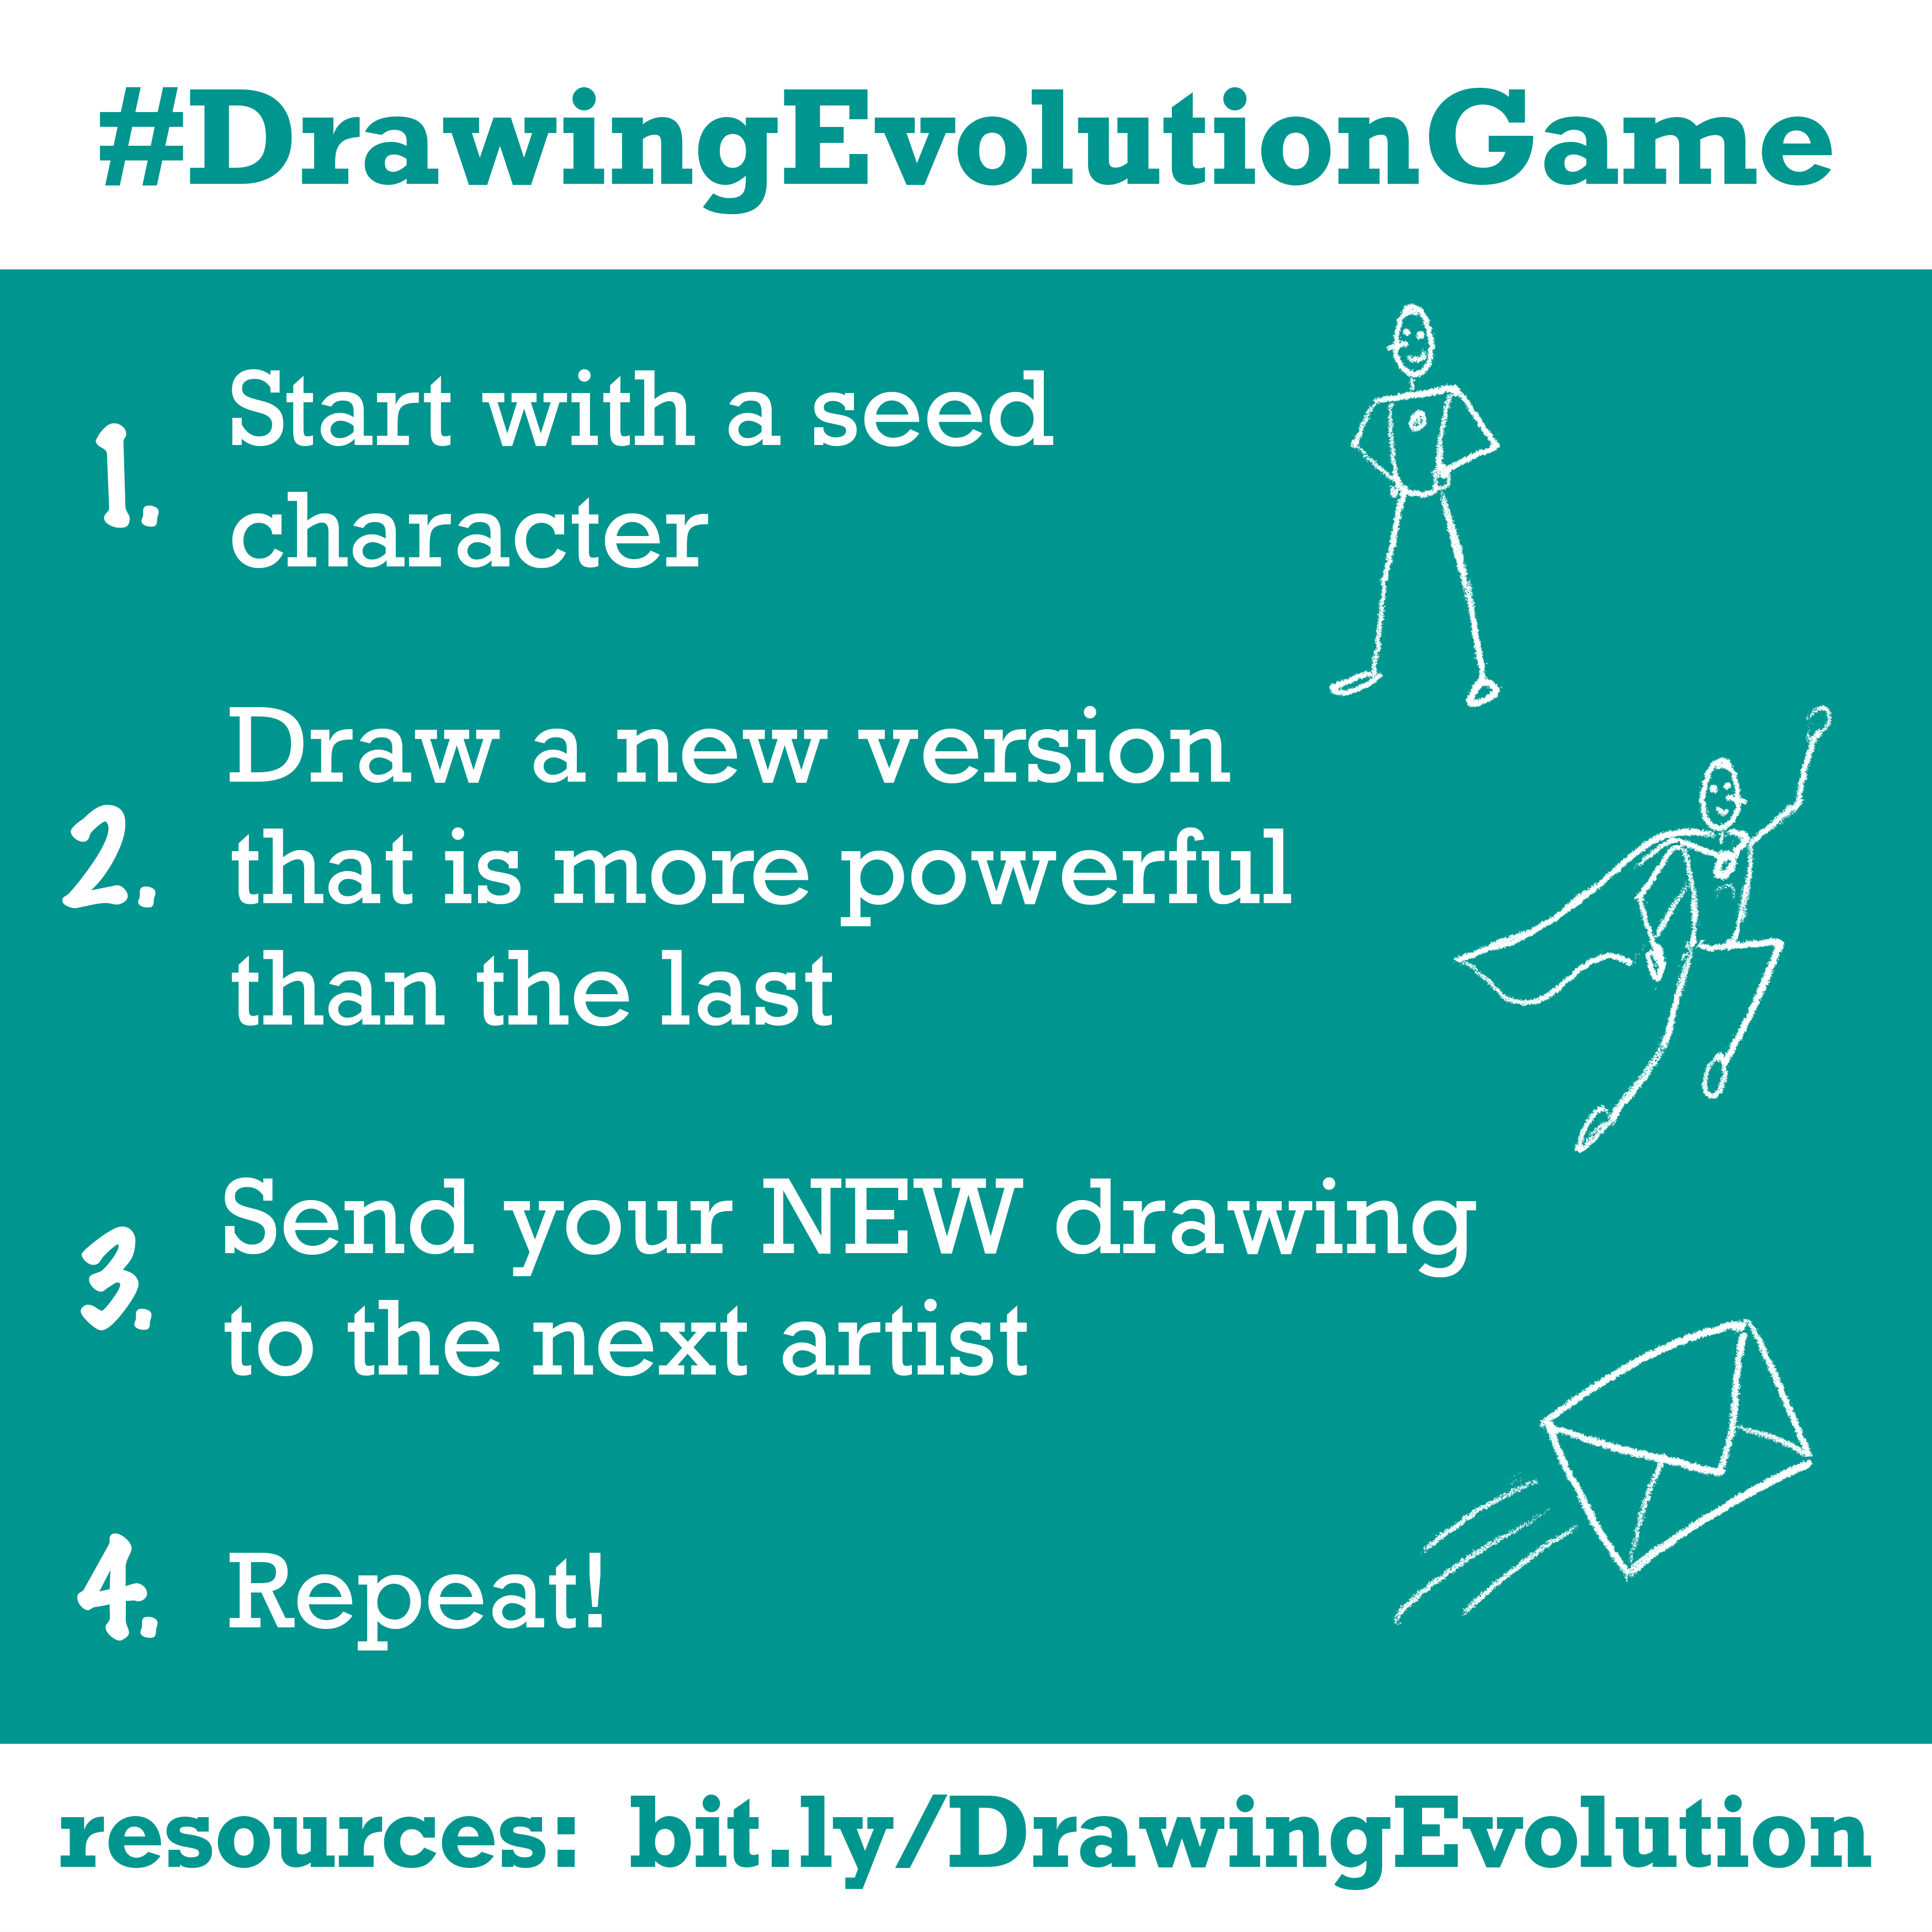 Simplified instructions for the #DrawingEvolutionGame in a convenient square format for social sharing